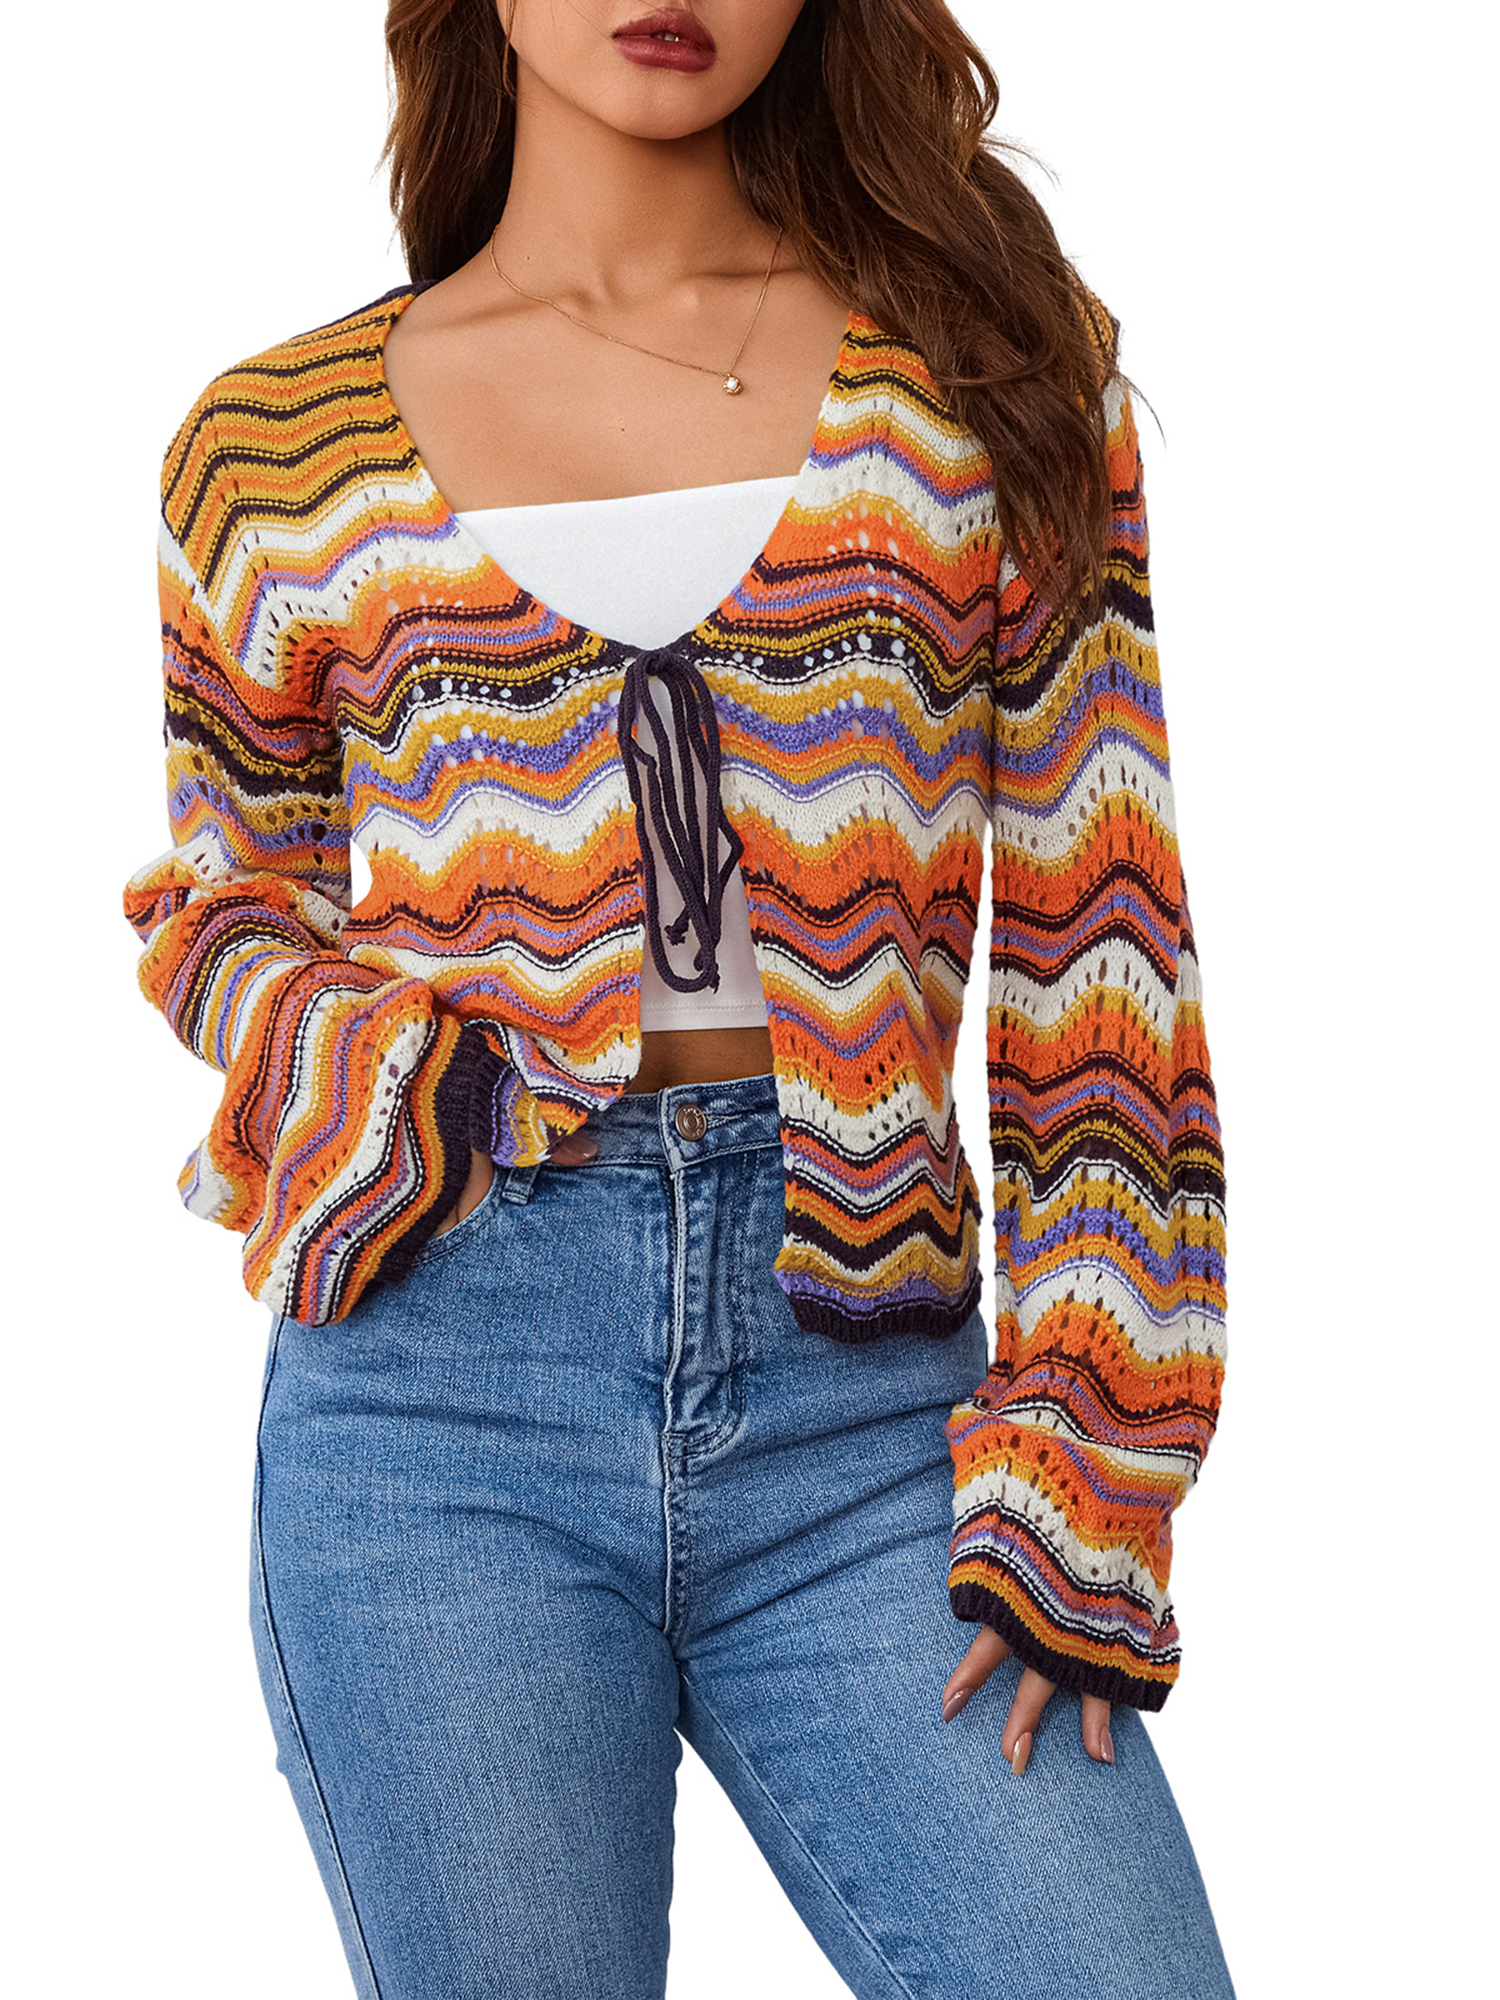 Tsseiatte Women's Spring Autumn Knit Sweater Long Sleeve V Neck Tie Up Colorful Striped Knitwear - image 1 of 6